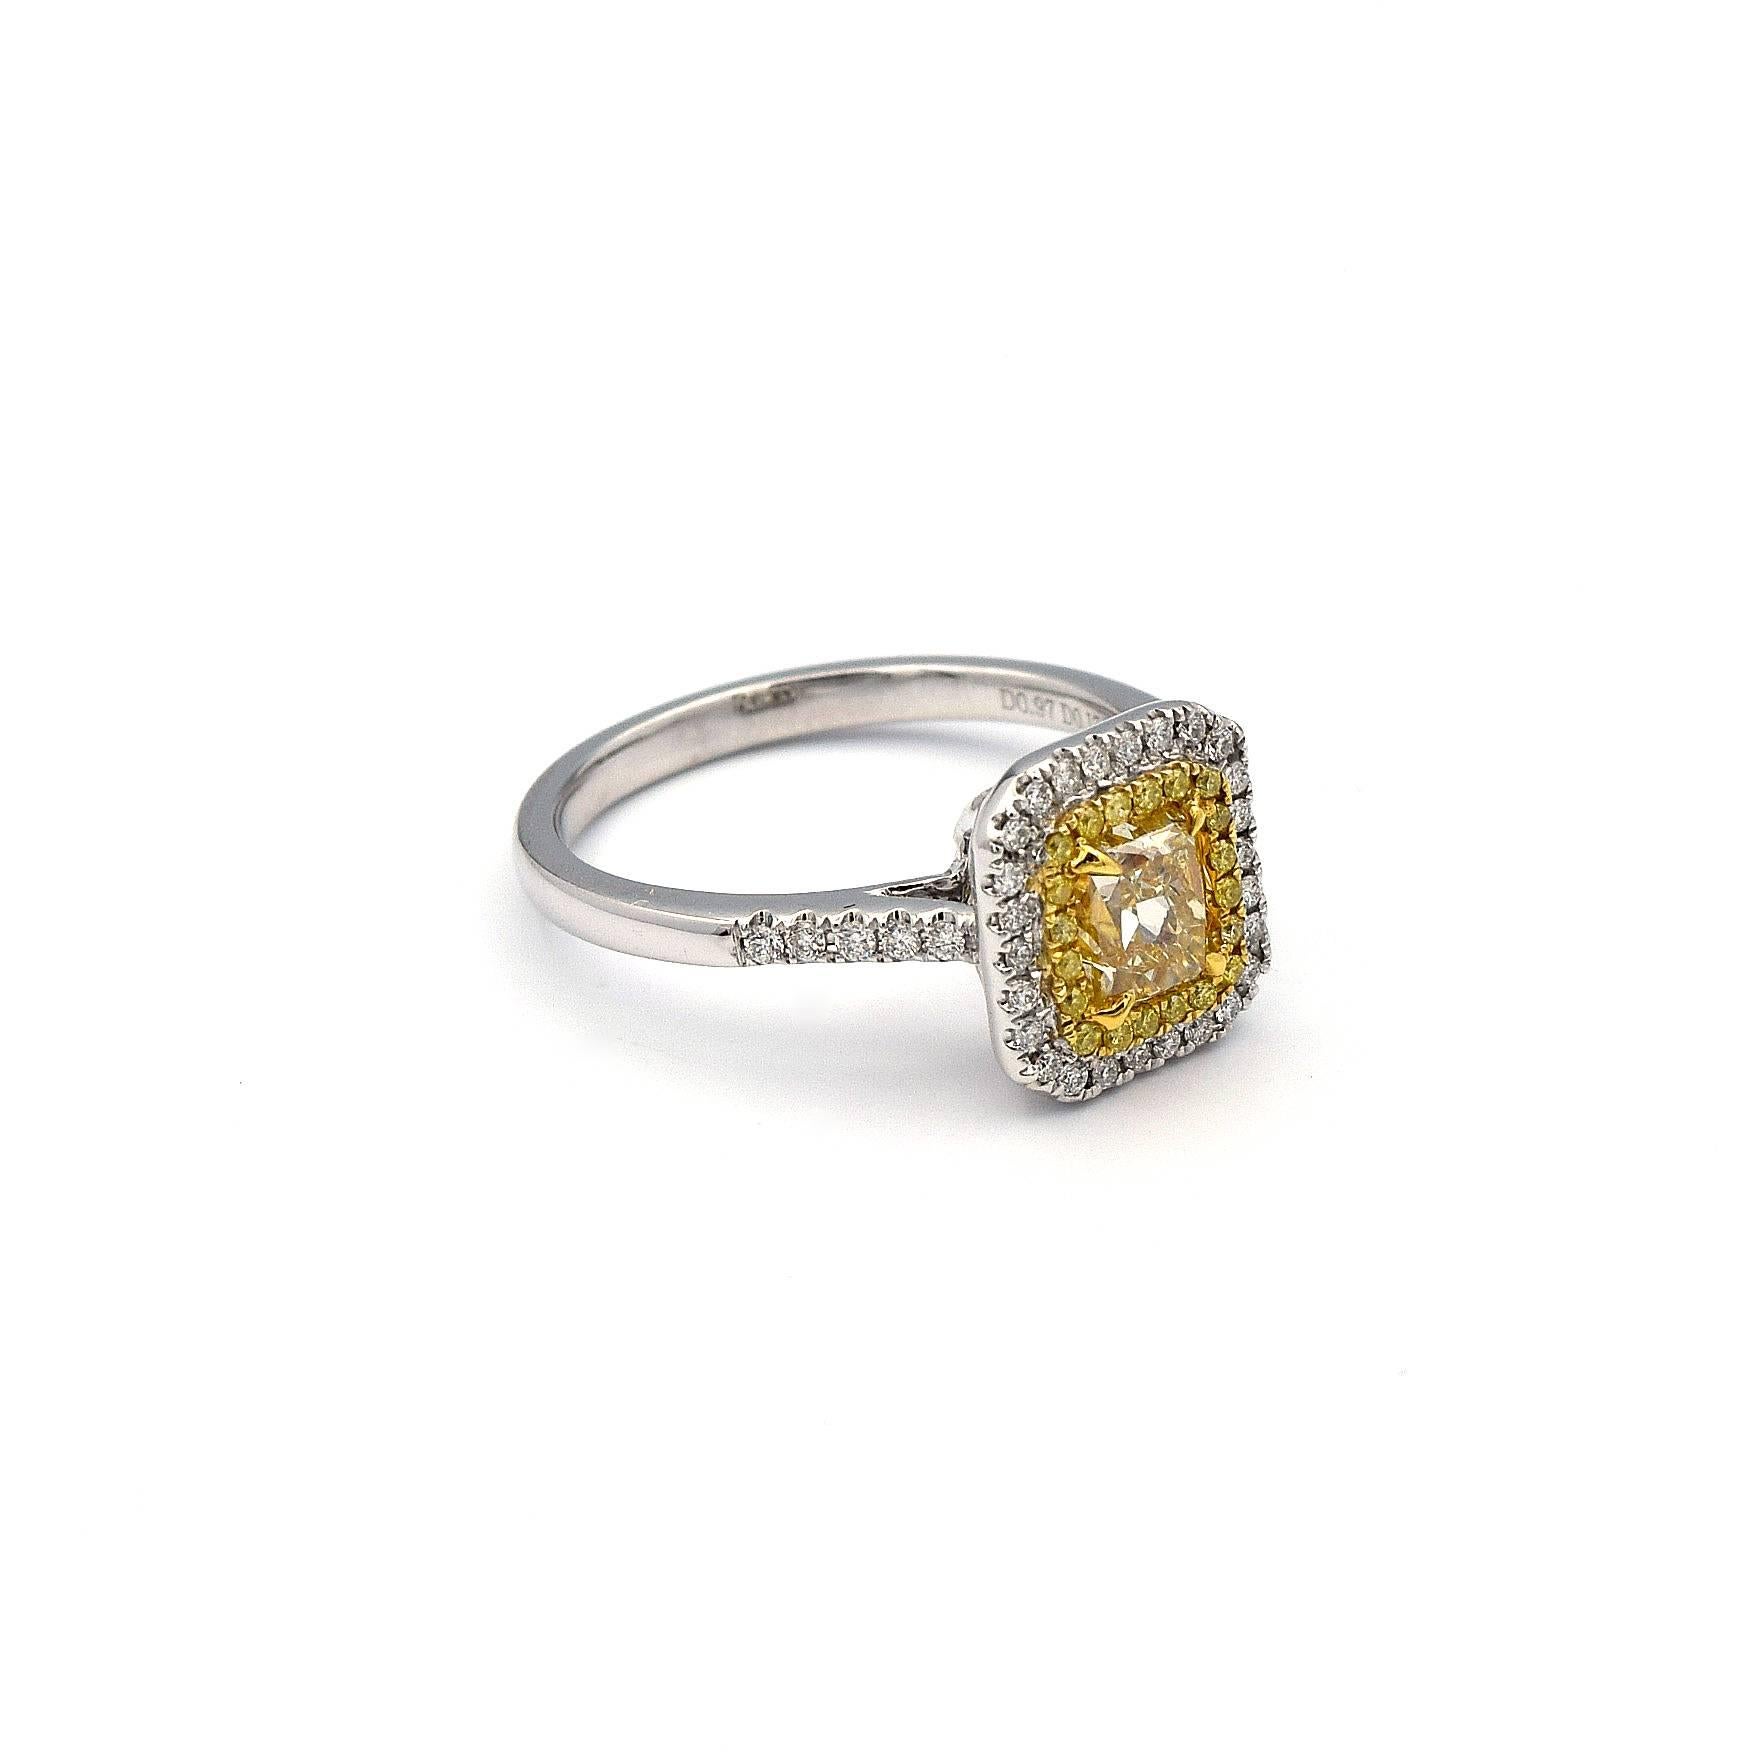 This gorgeous ring has a stunning 0.97ct Radiant Natural Yellow Diamond in the center, along with 20 yellow Pave diamonds weighting 0.08ct and 36 white Pave Diamonds weighting 0.17ct.

Makes a lovely engagement ring, or just a ring to add to your